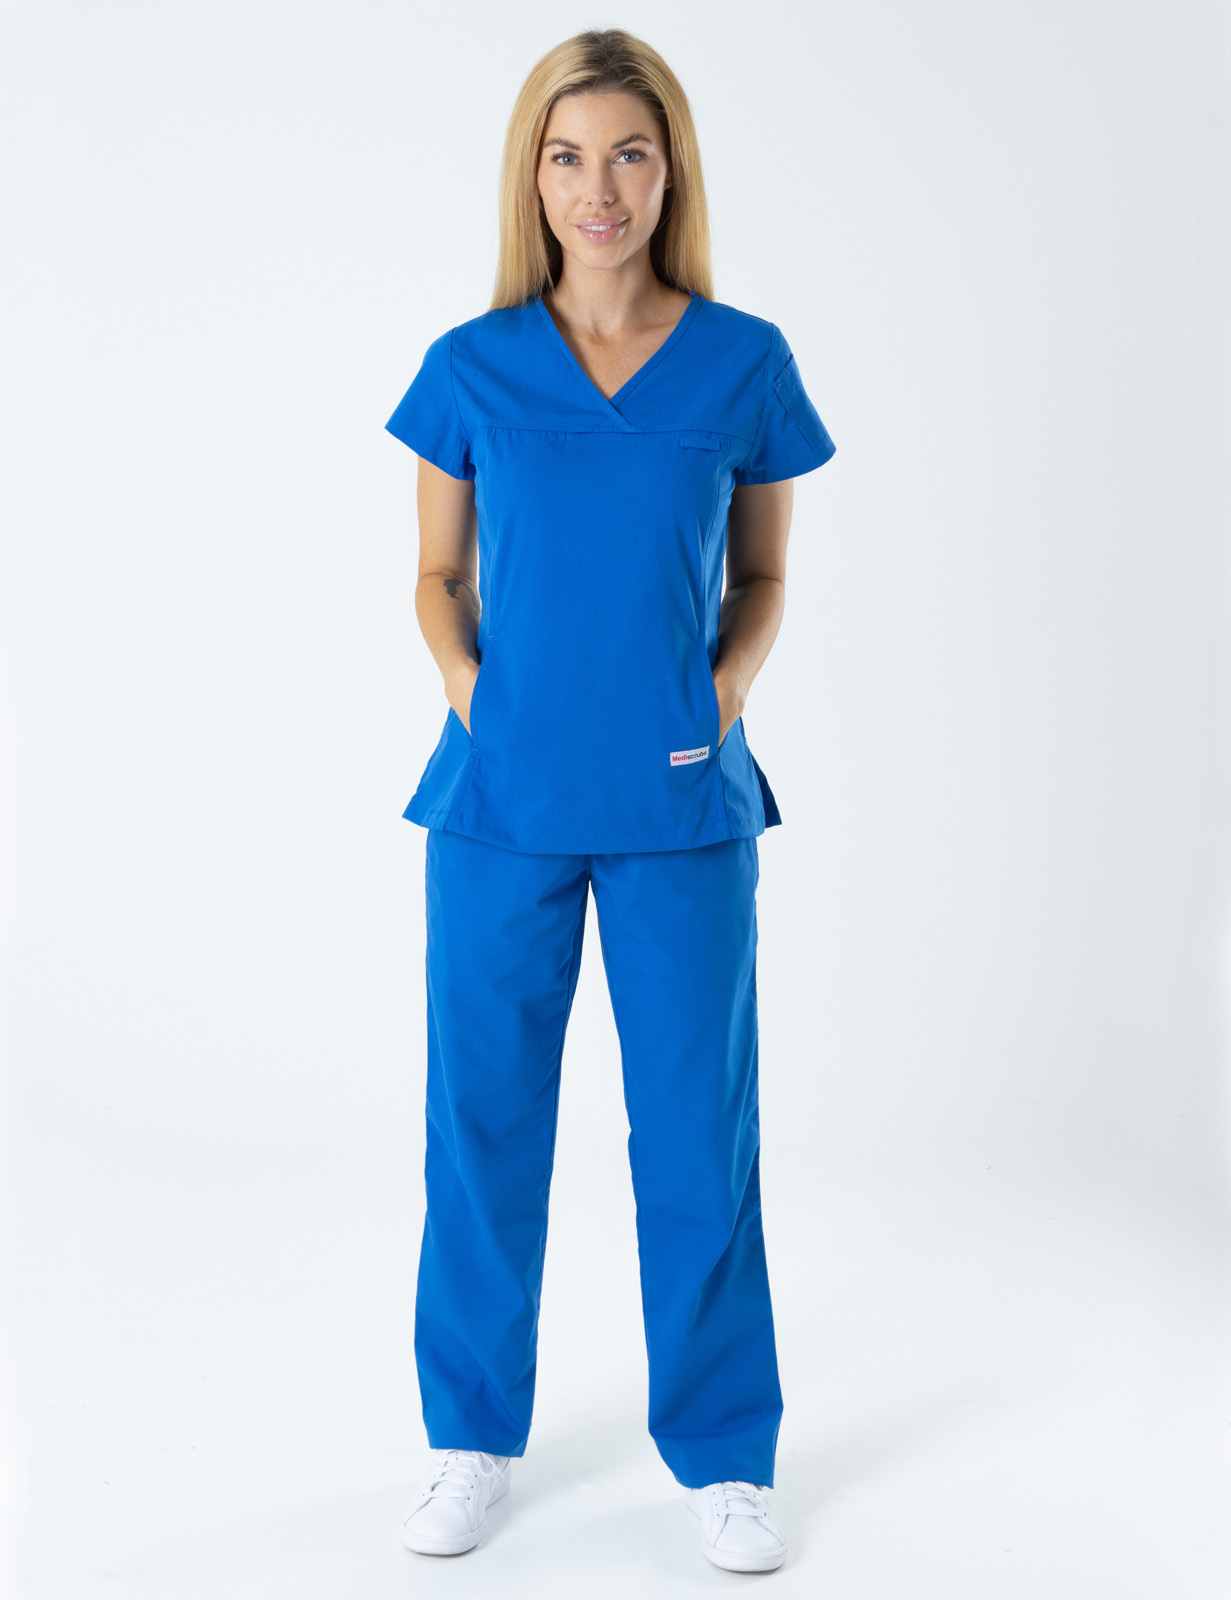 Royal Hobart Hospital Emergency Department Specialist Uniform Set Bundle (Women's Fit Top and Cargo Pants in Royal  incl Logo)